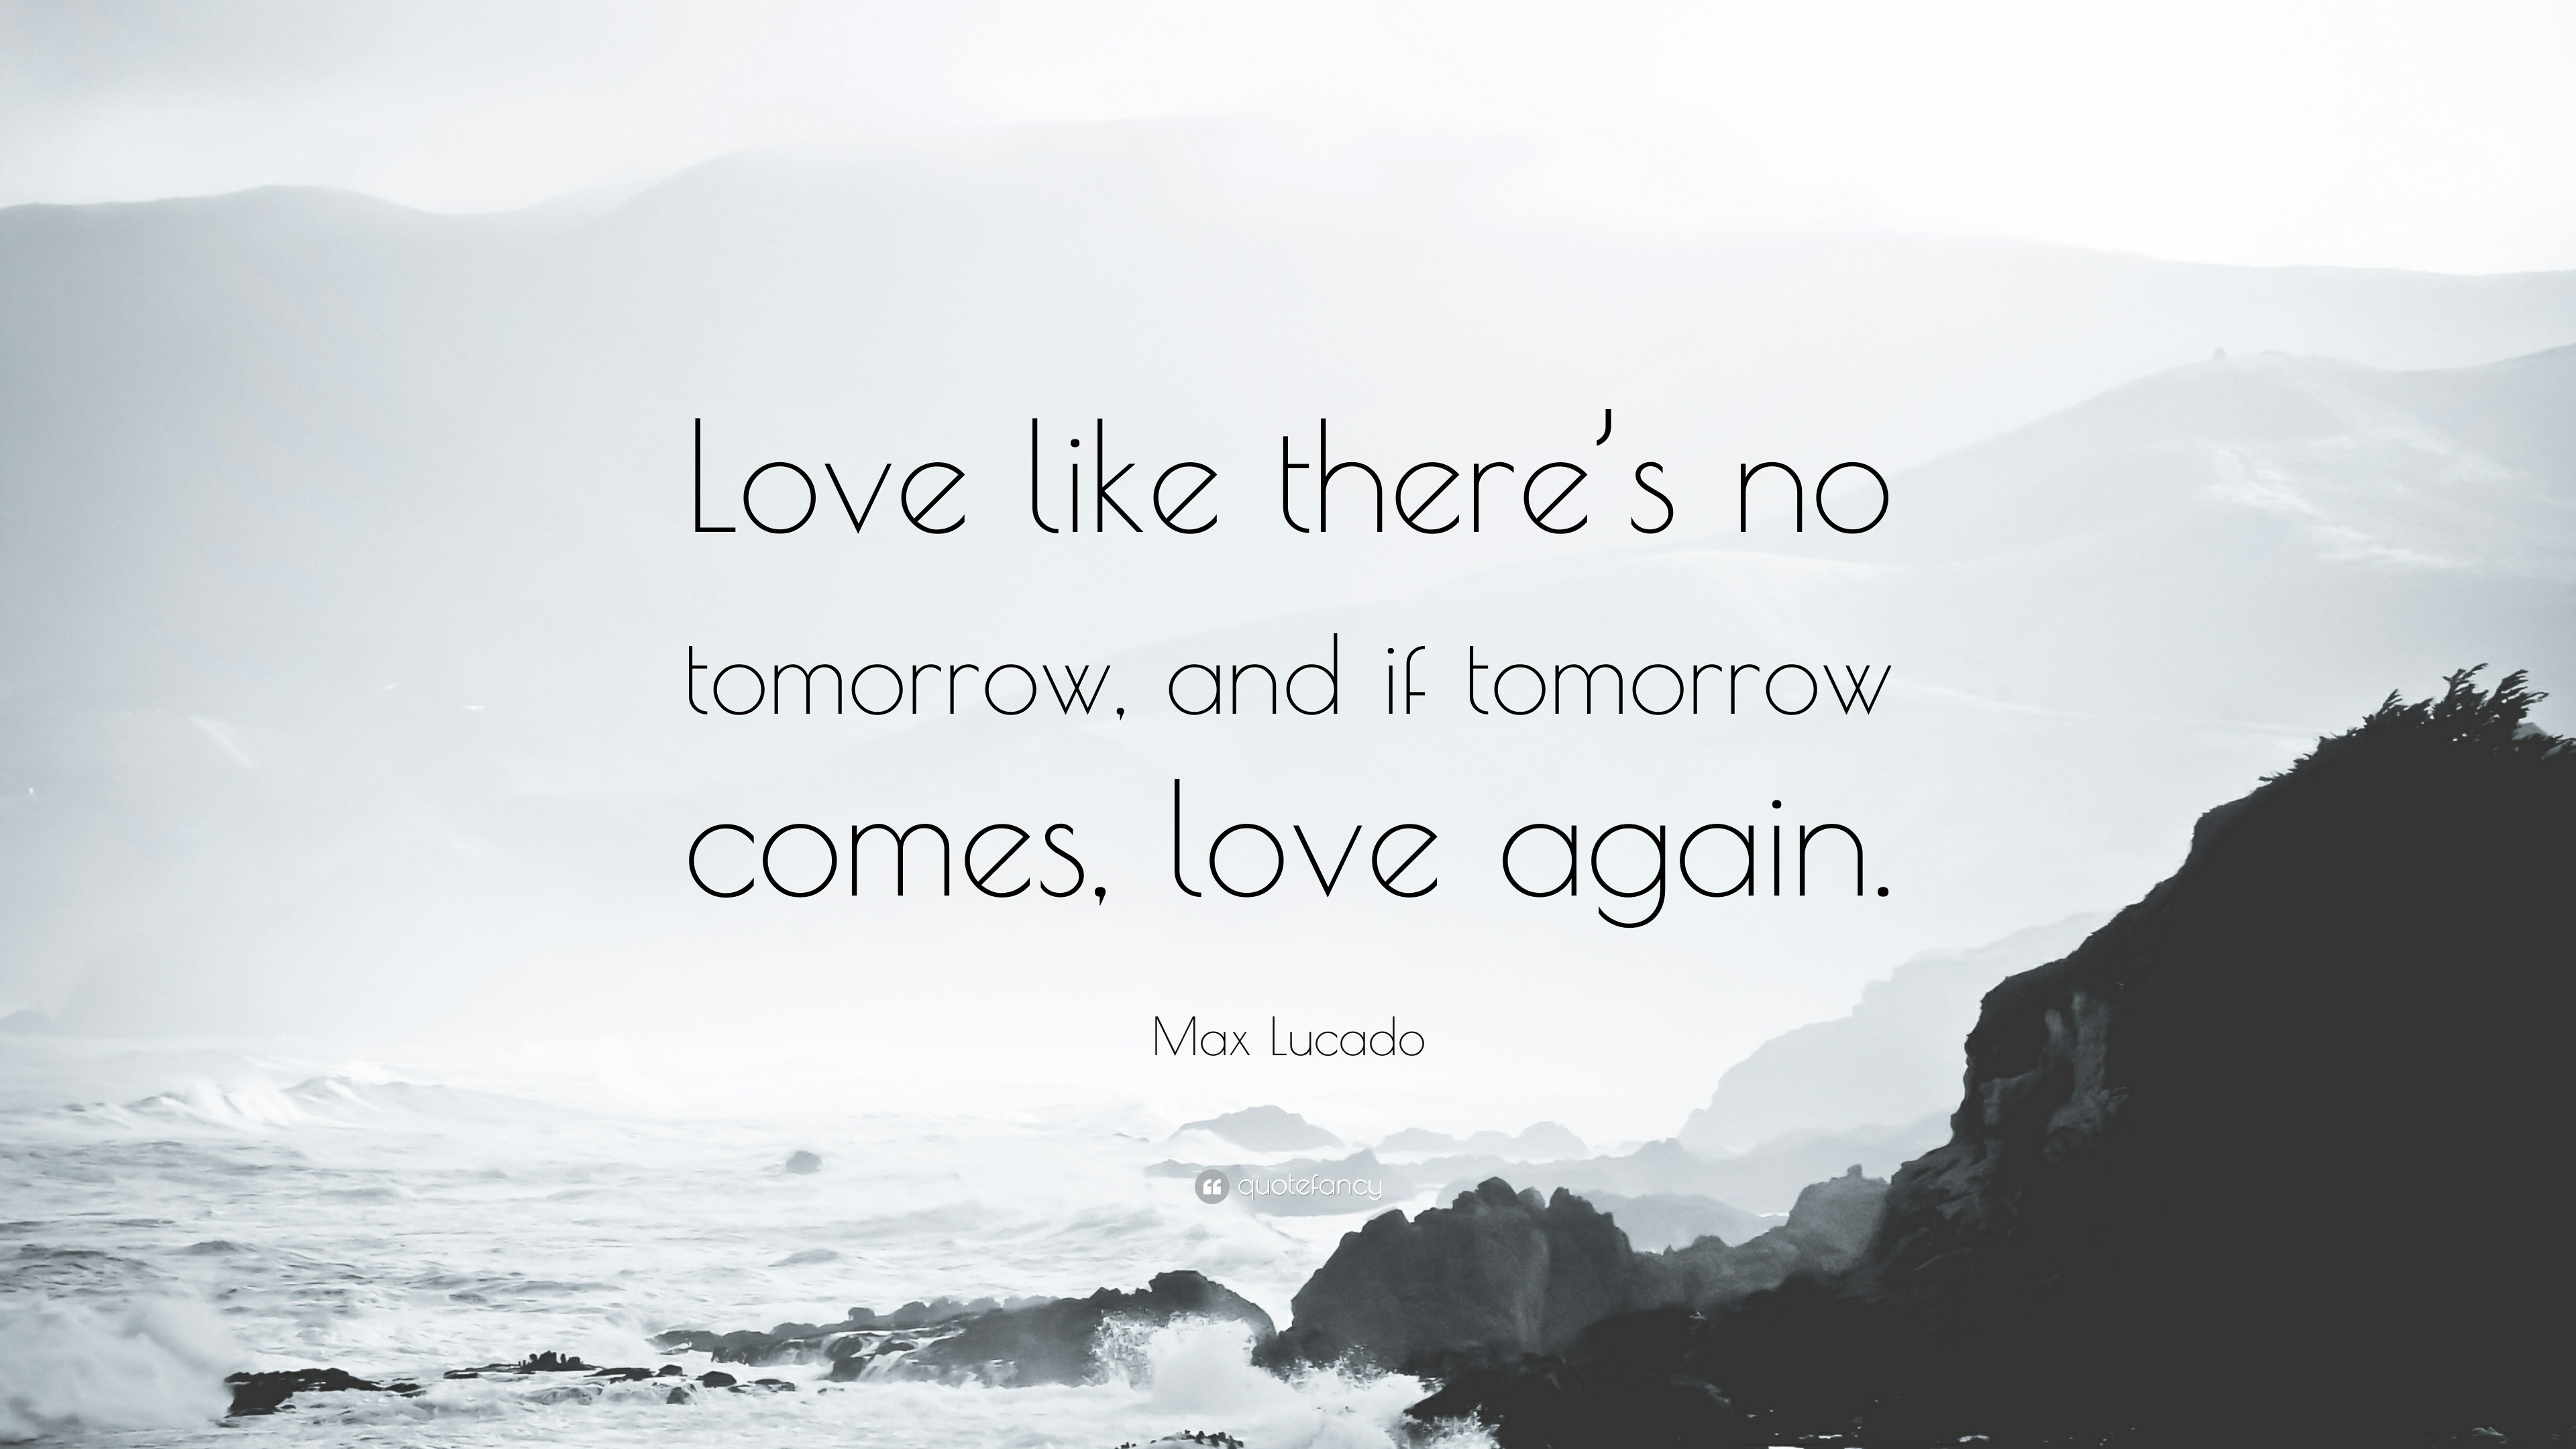 Max Lucado Quote Love Like There S No Tomorrow And If Tomorrow Comes Love Again 19 Wallpapers Quotefancy